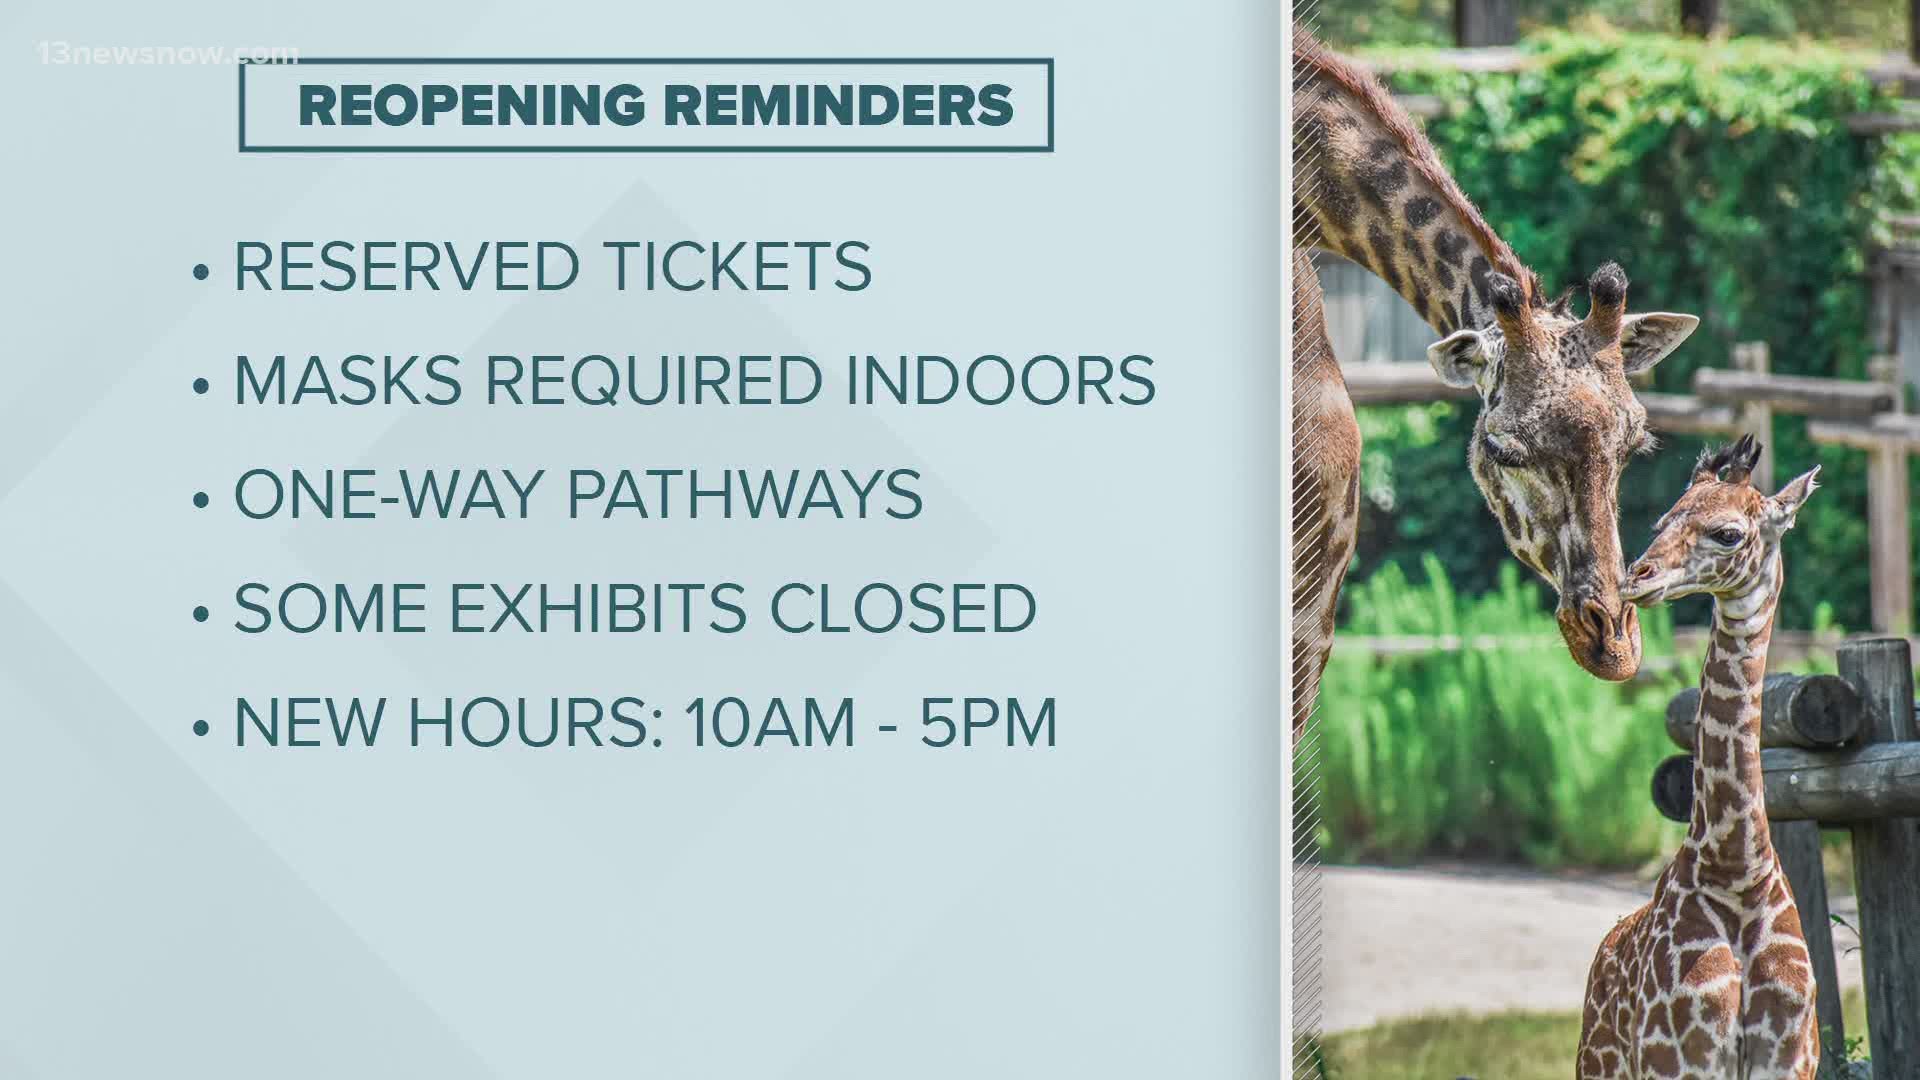 The Virginia Zoo will limit the capacity of people allowed in the park to about 25 percent. Remember: masks are required to be worn by visitors.